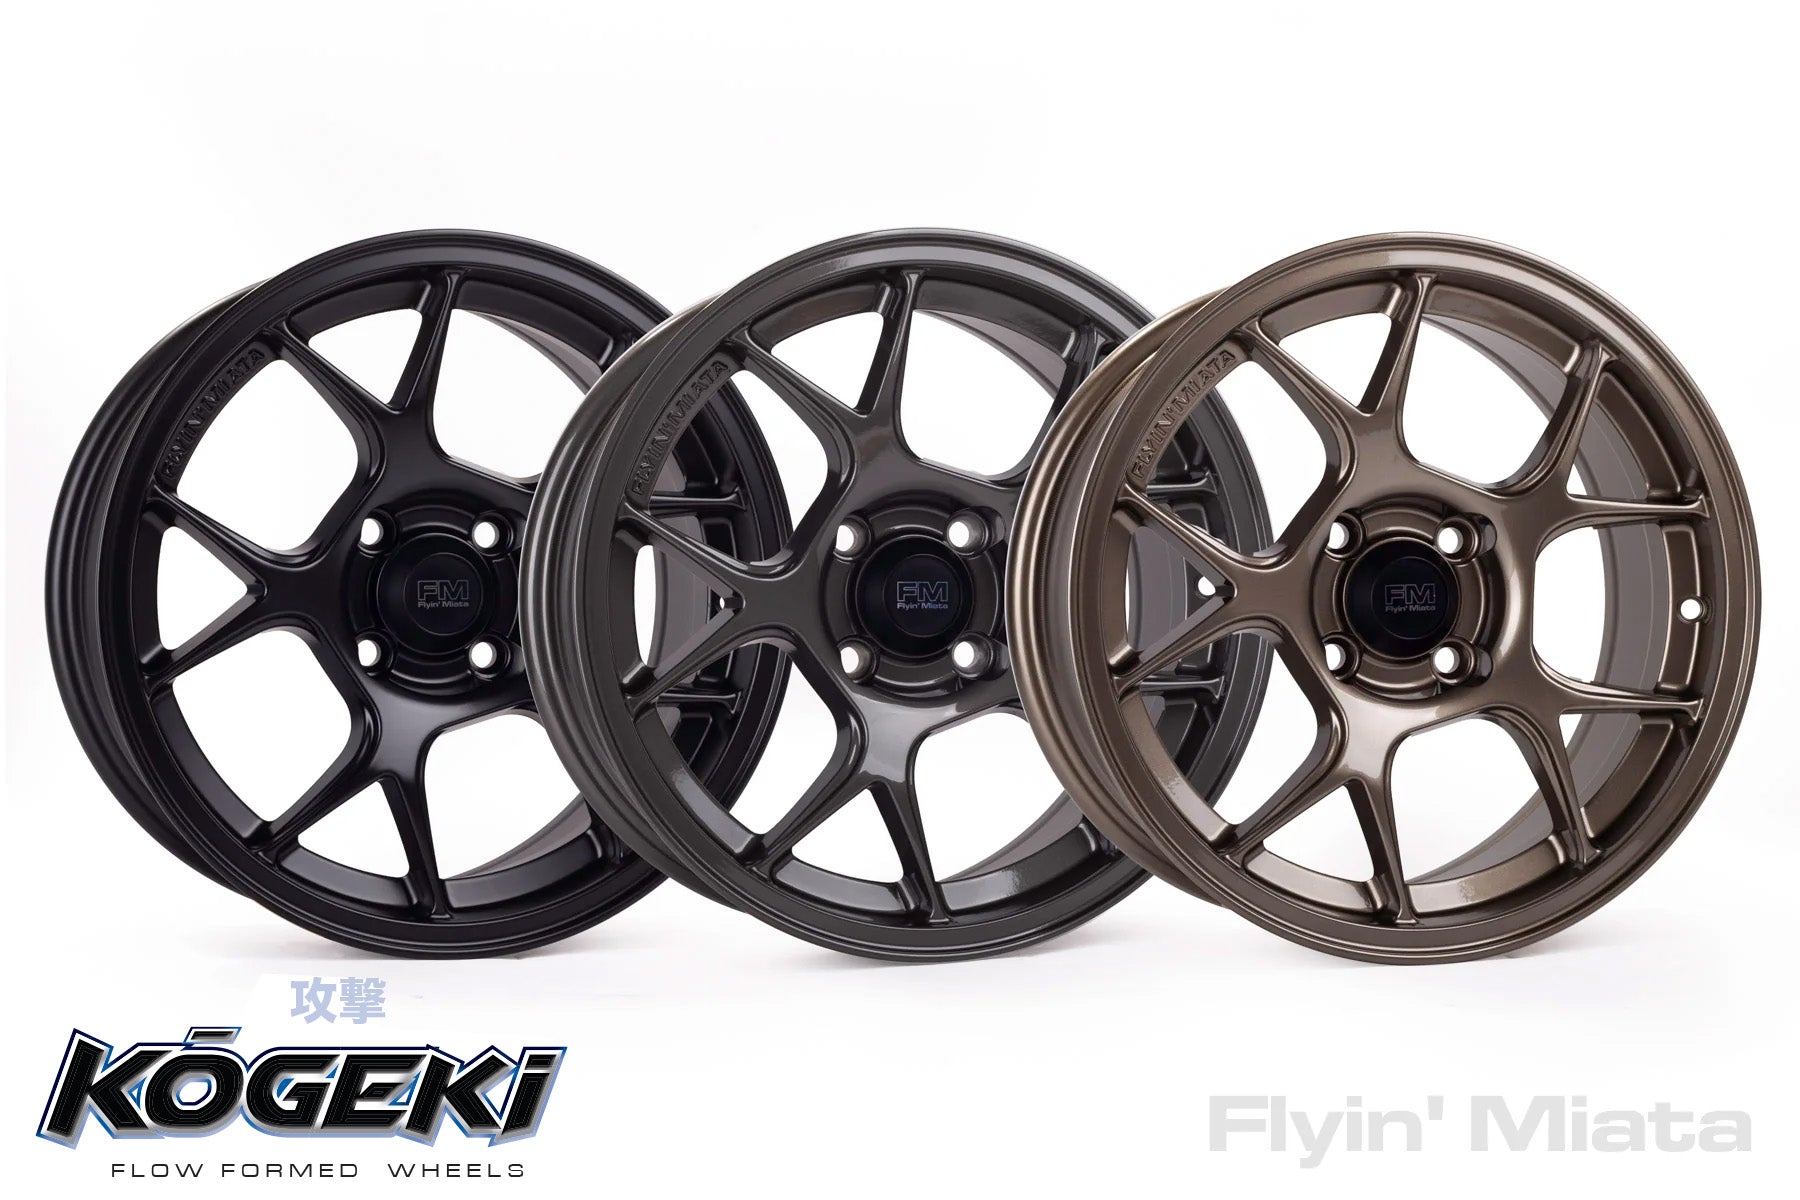 Strong, light and affordable meet sexy. Our exclusive flow formed wheel for  the NA and NB! The 15x9 size is a good match to a 225/45-15 for 